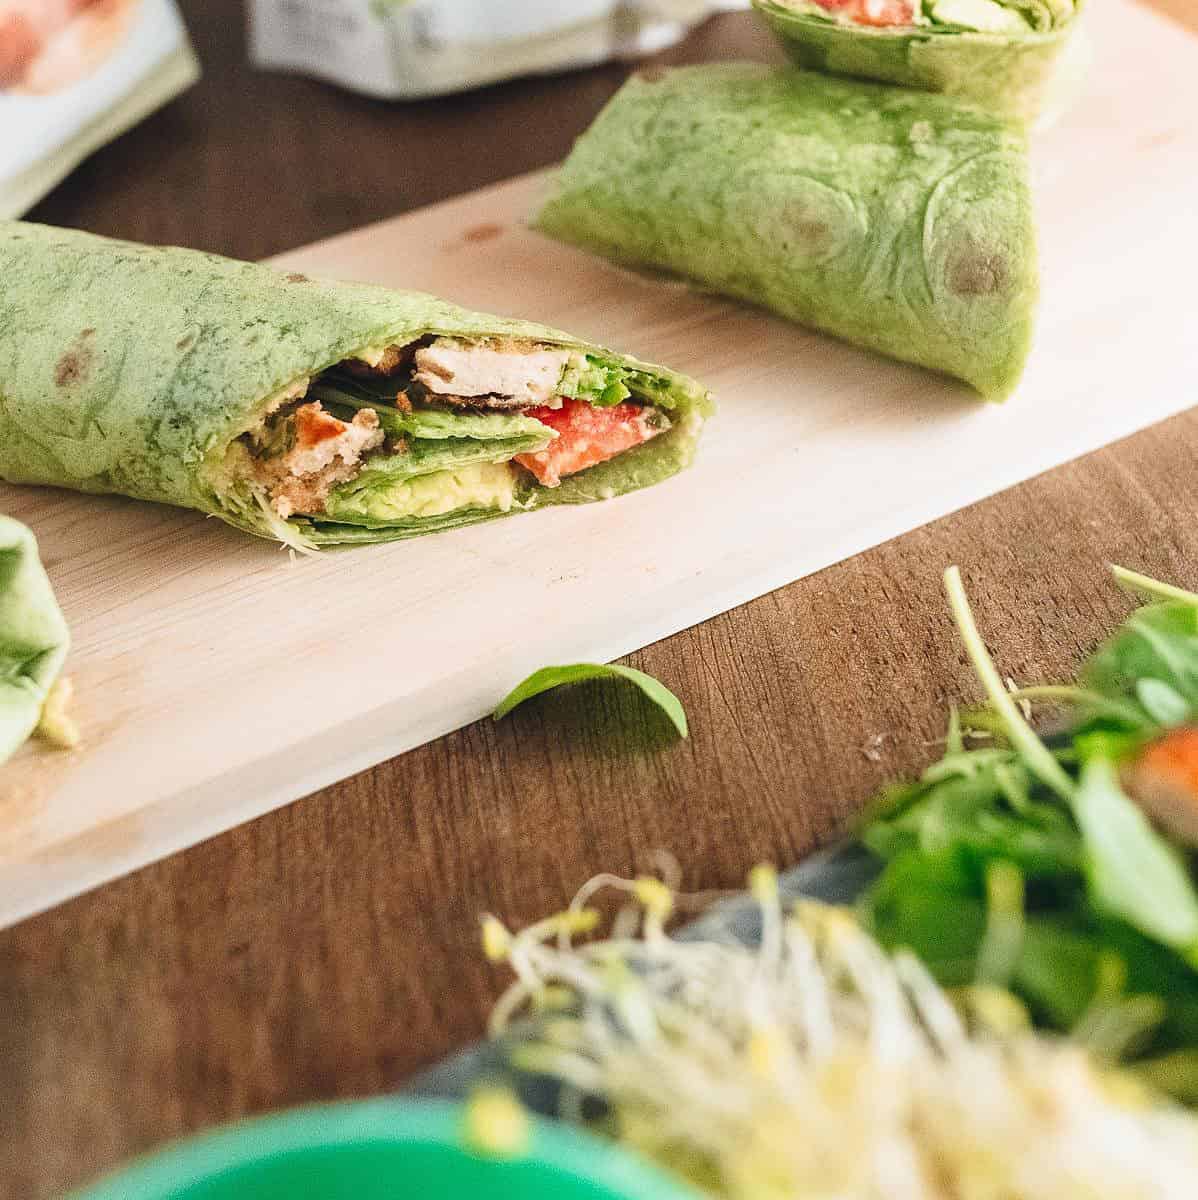  Say hello to your new favorite lunchtime wrap!